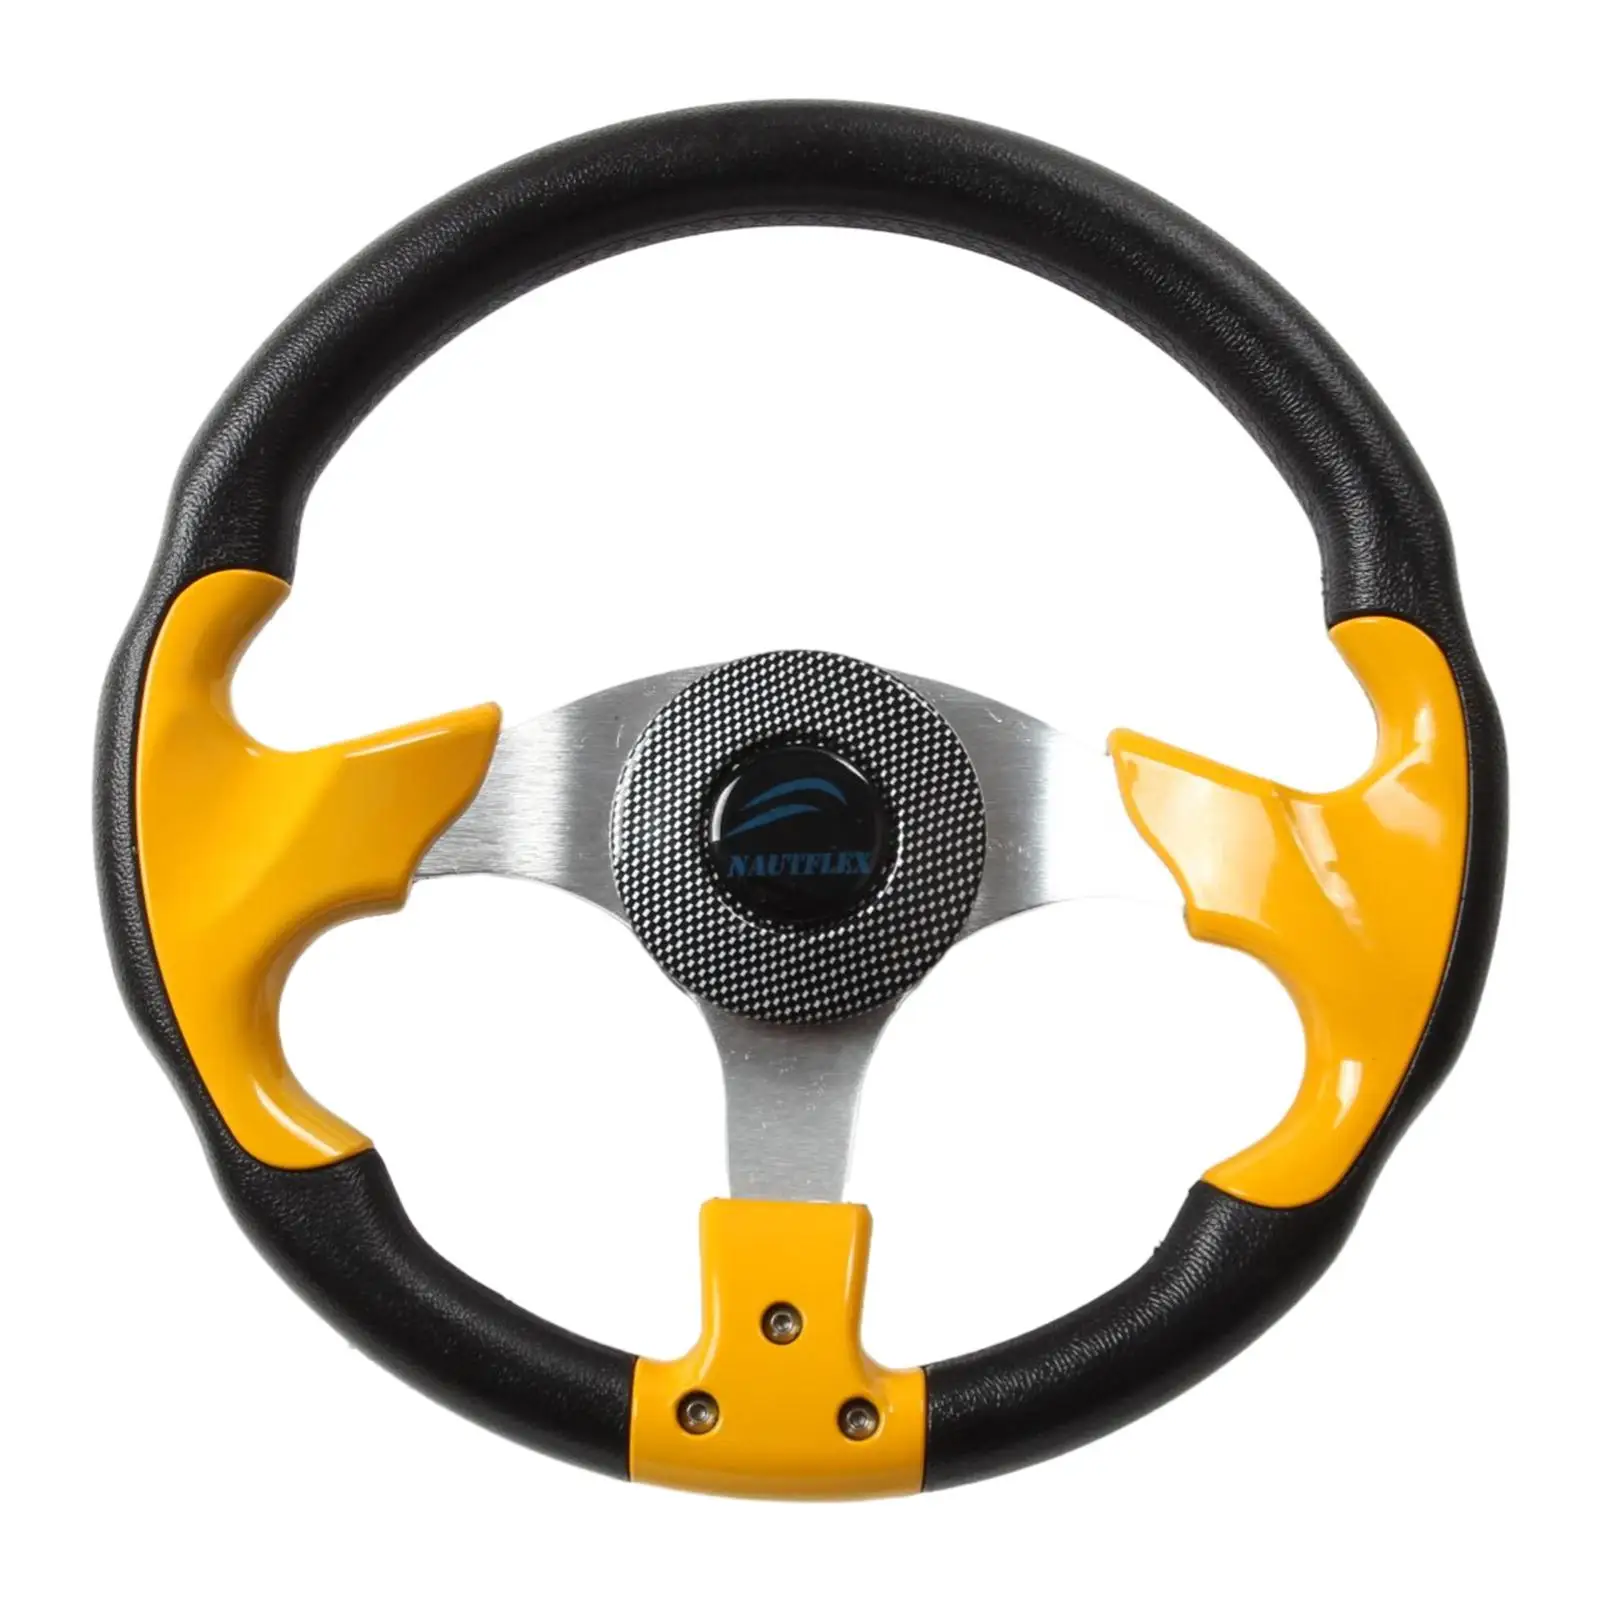 

Marine Boat Steering Wheel 320mm Yellow Replacement 3 Spoke 3/4" Tapered Shaft for Boat Marine Vessels Accessories Yacht